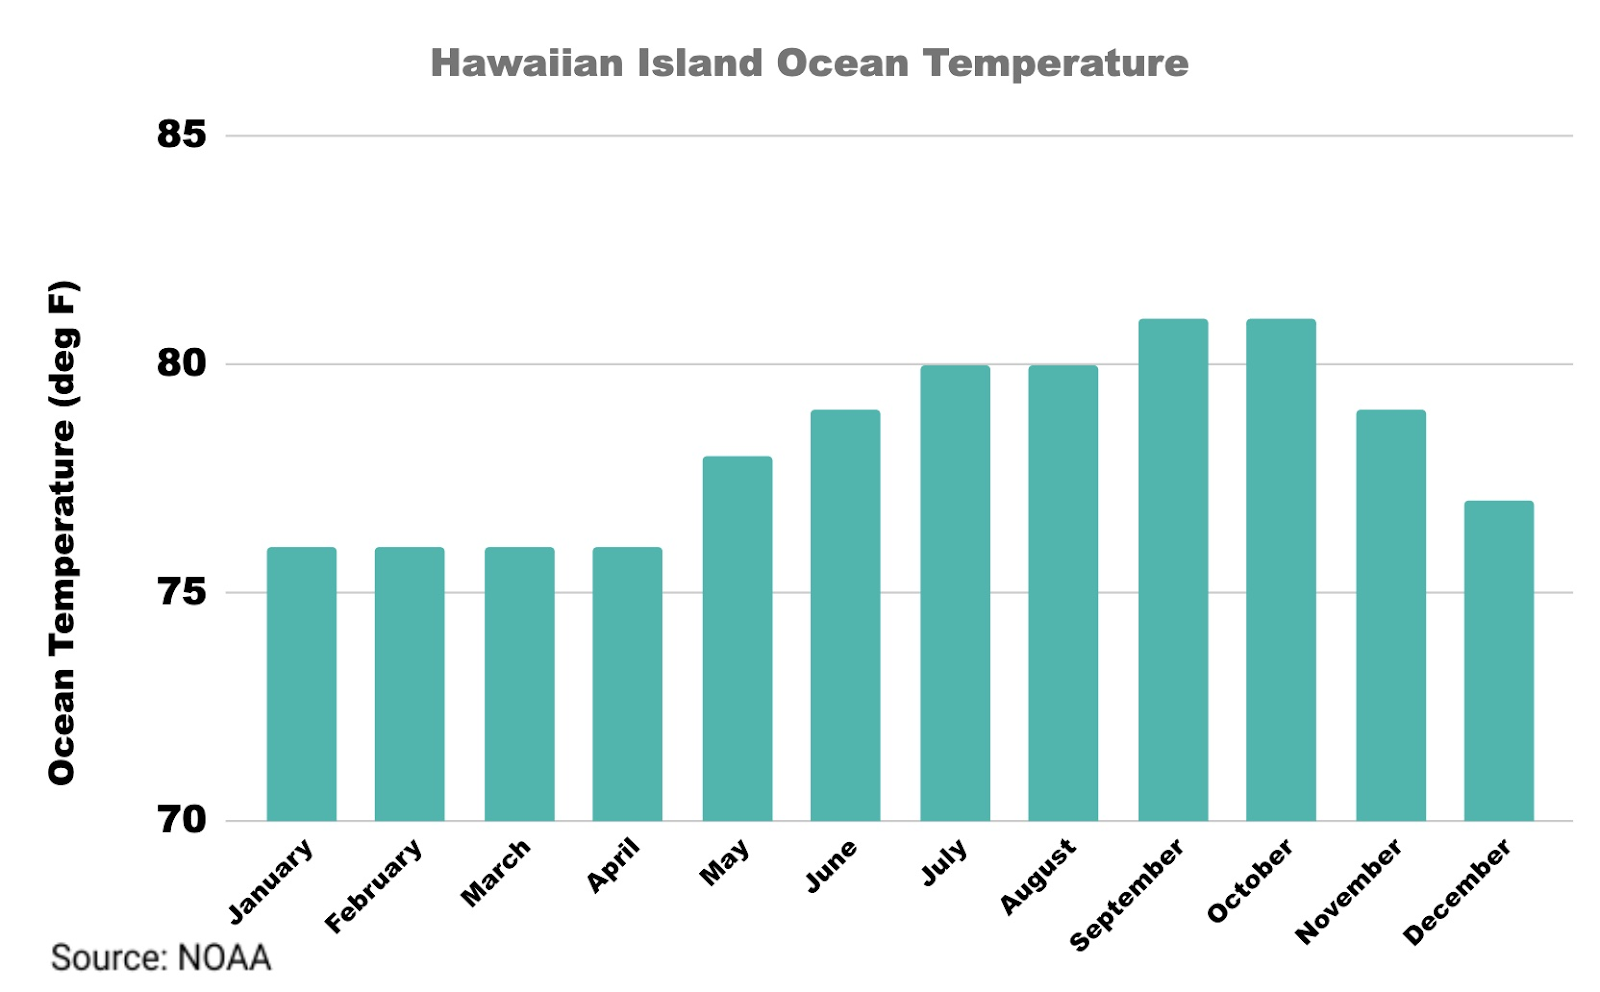 Hawaii in August - Hawaiian island ocean temperature (F) 76 degrees January to April, then between 77 and 82 degrees the rest of the year